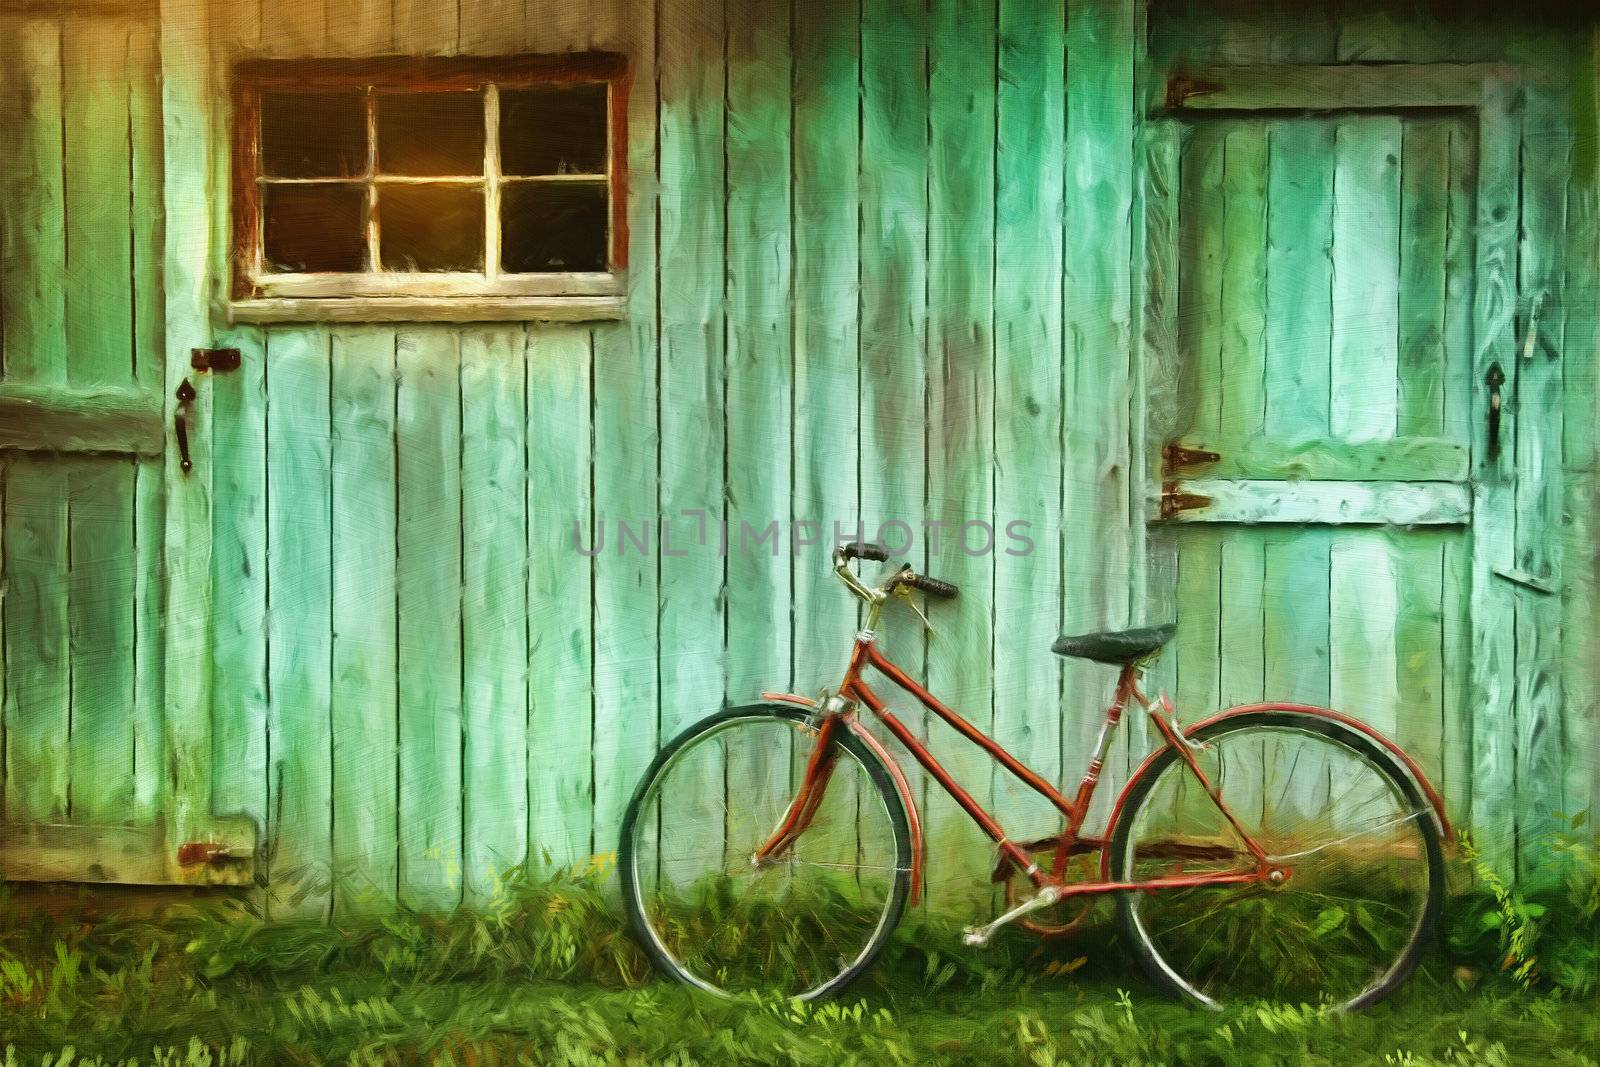 Digital Painting of old bicycle  against  barn by Sandralise